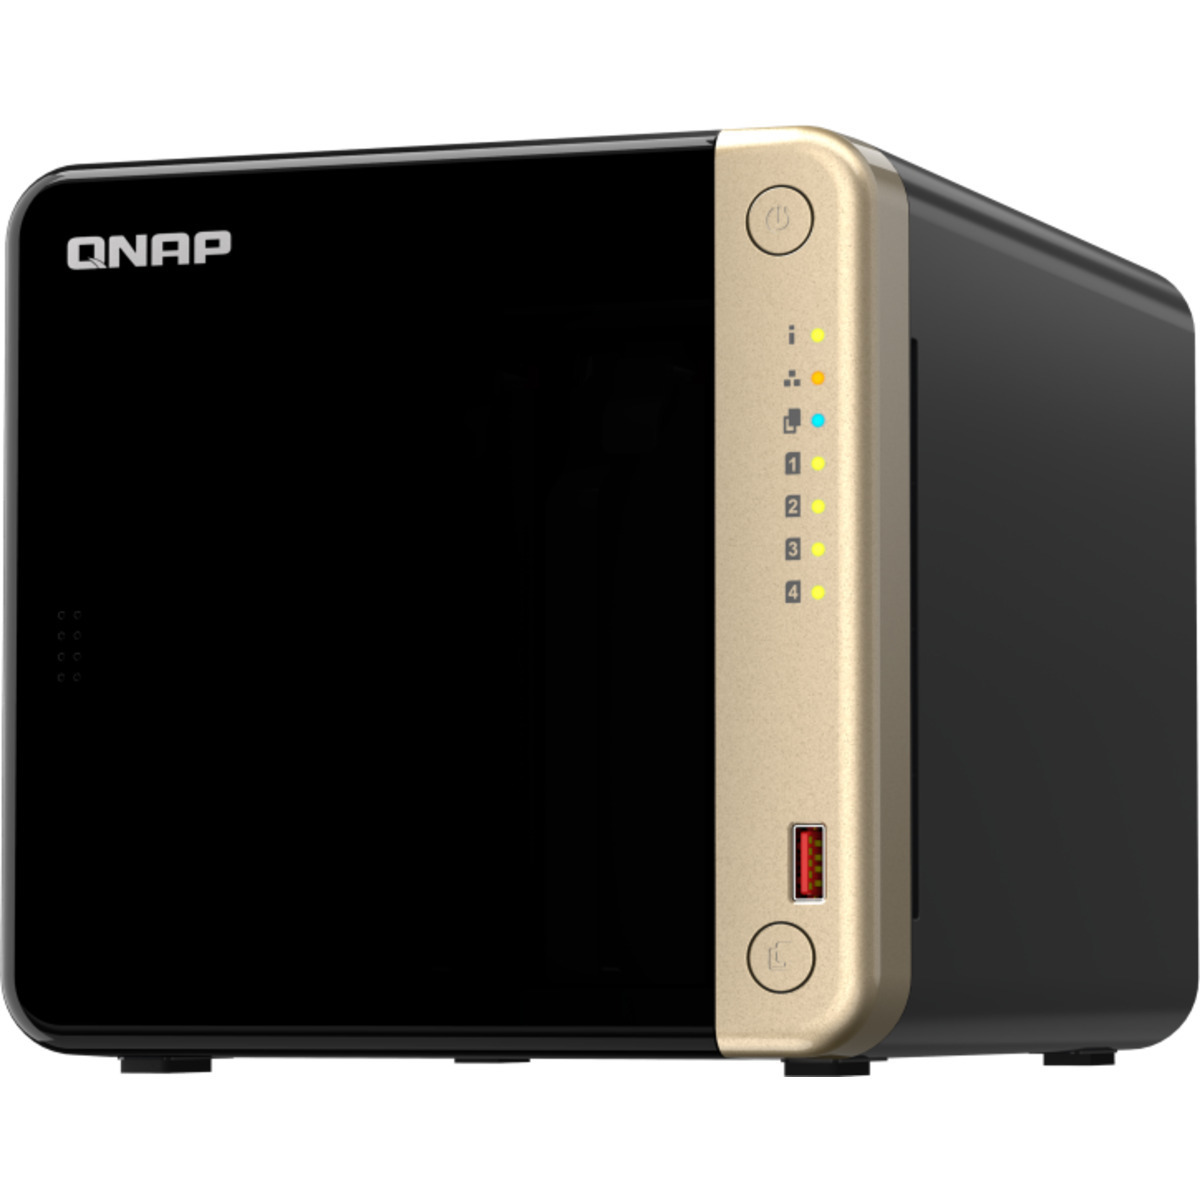 QNAP TS-464 24tb 4-Bay Desktop Multimedia / Power User / Business NAS - Network Attached Storage Device 4x6tb Western Digital Red Plus WD60EFPX 3.5 5640rpm SATA 6Gb/s HDD NAS Class Drives Installed - Burn-In Tested TS-464